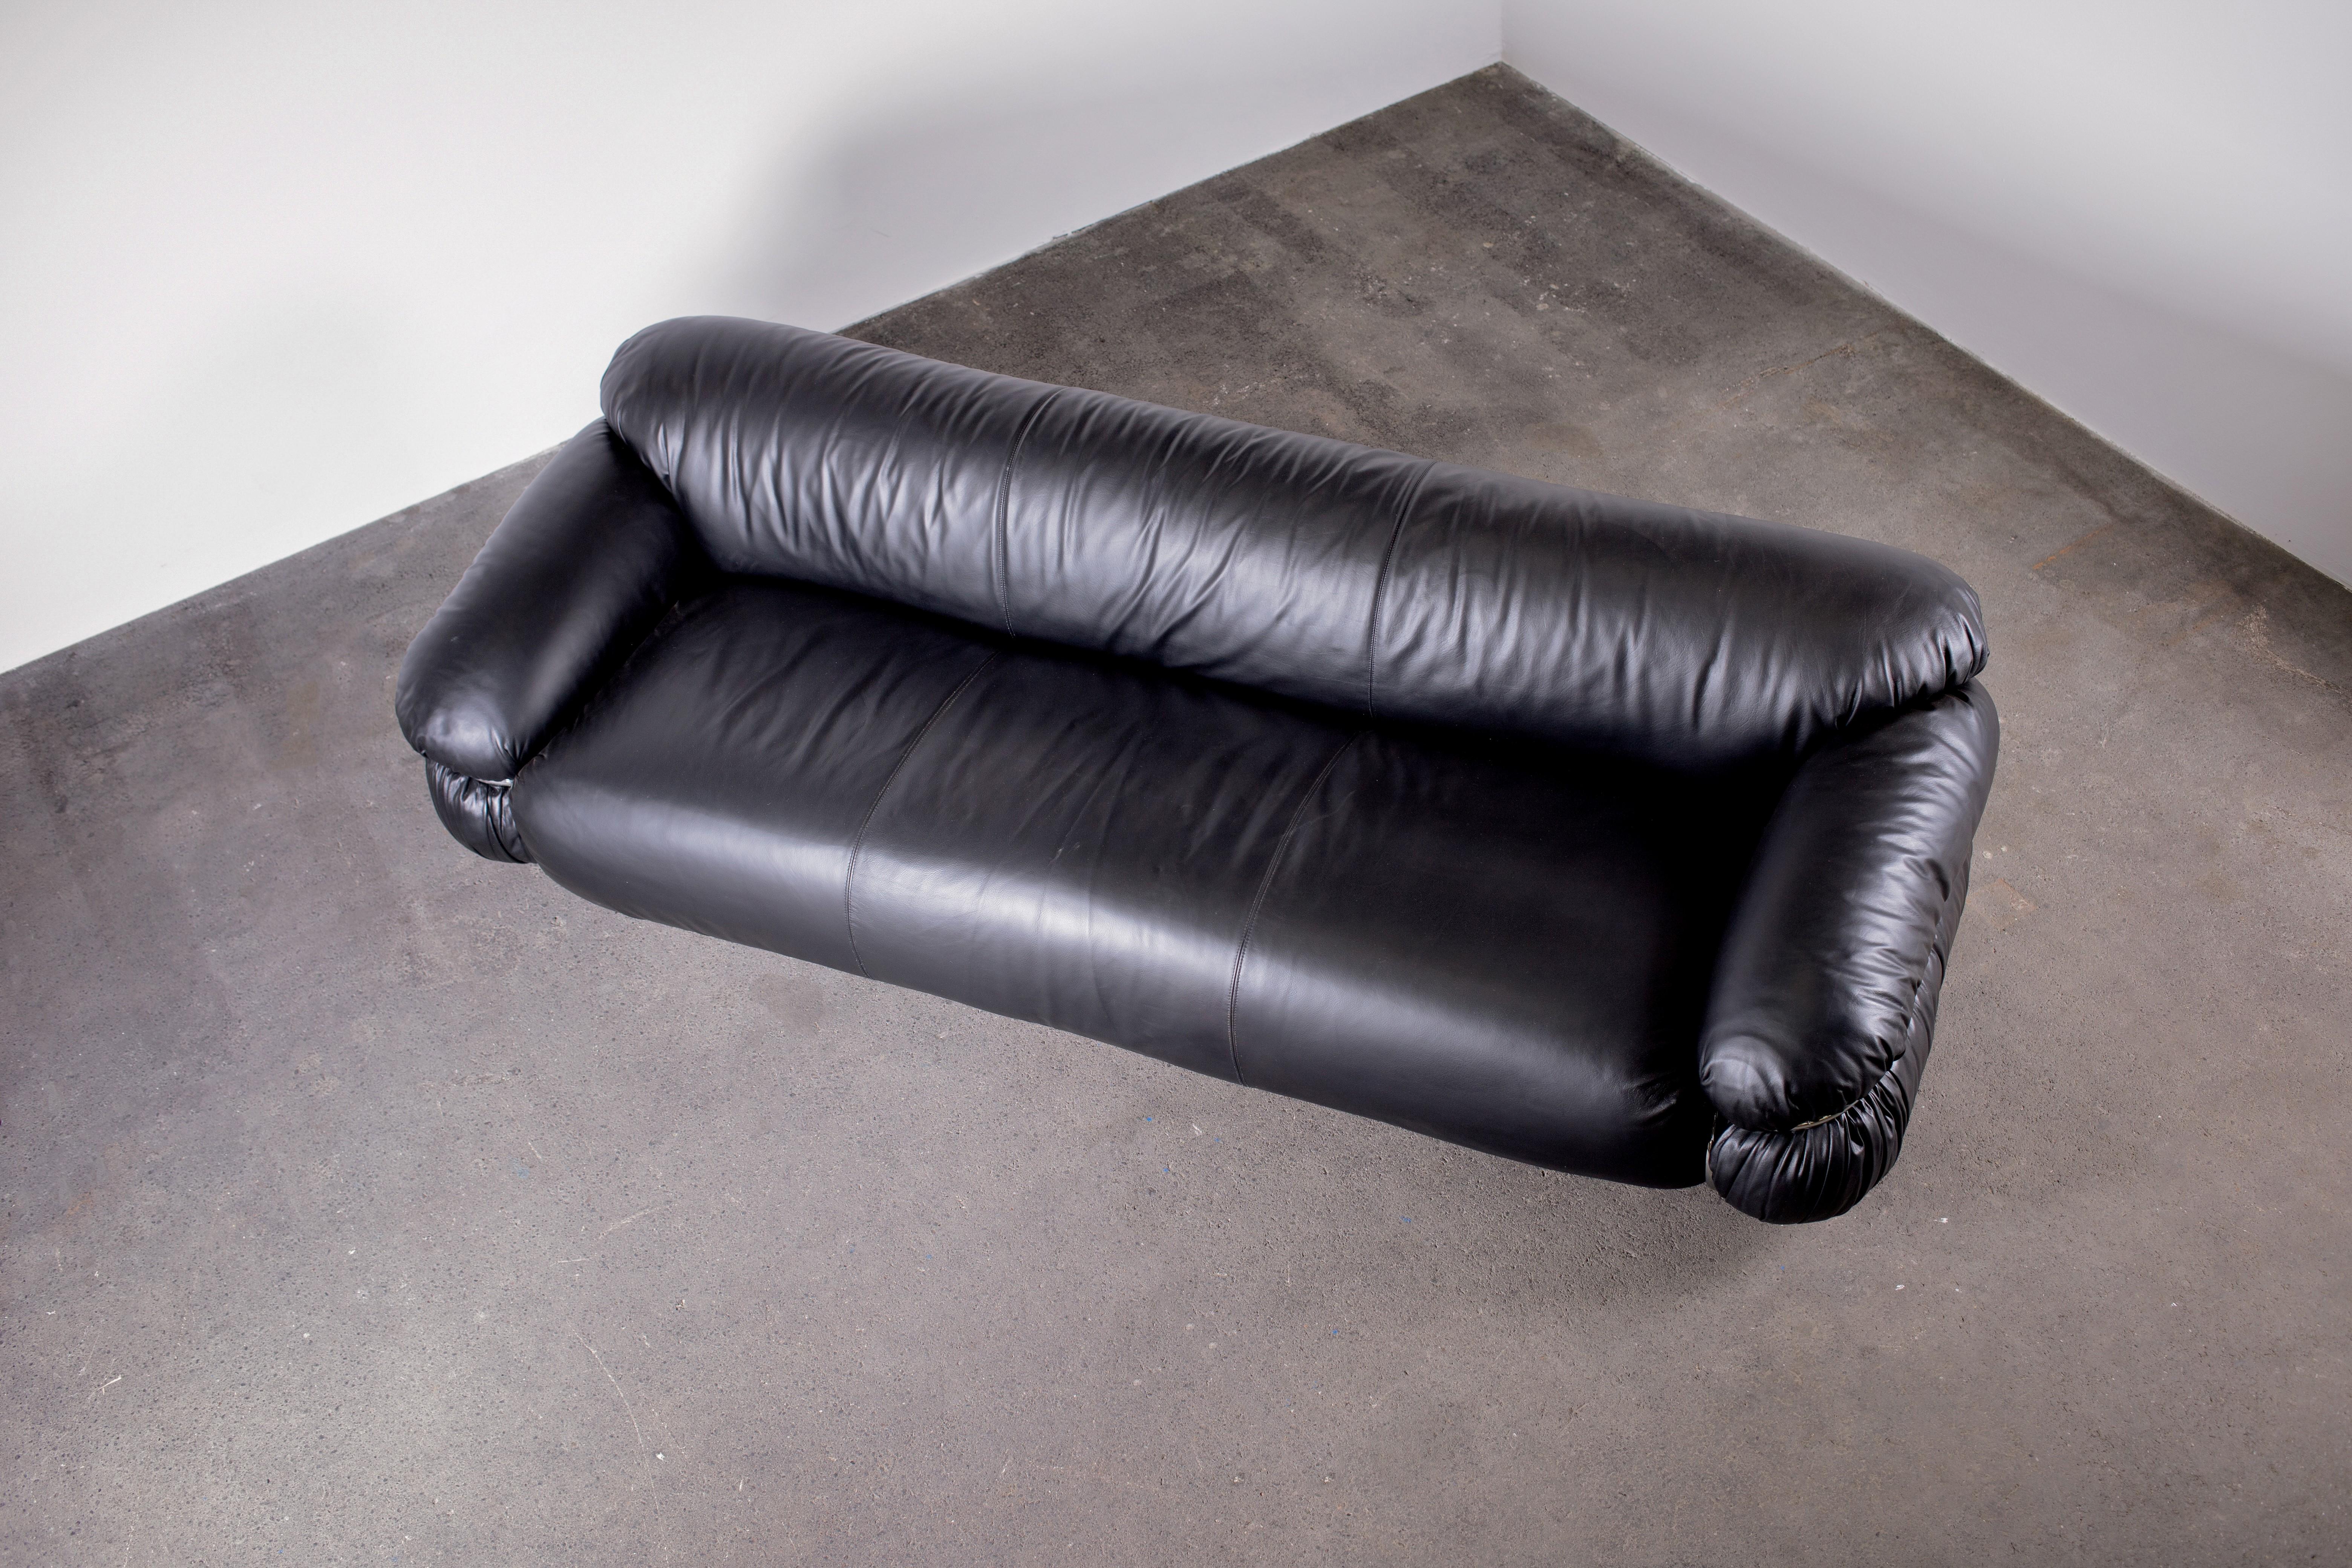 Bold, voluptuous and curvy. The original iconic 3-seater Sesann sofa by Gianfranco Frattini for Cassina. A worthy (and often favored) peer of the Soriana sofa by Afra & Tobia Scarpa.

Soft black leather envelopes an extremely plush filling. All